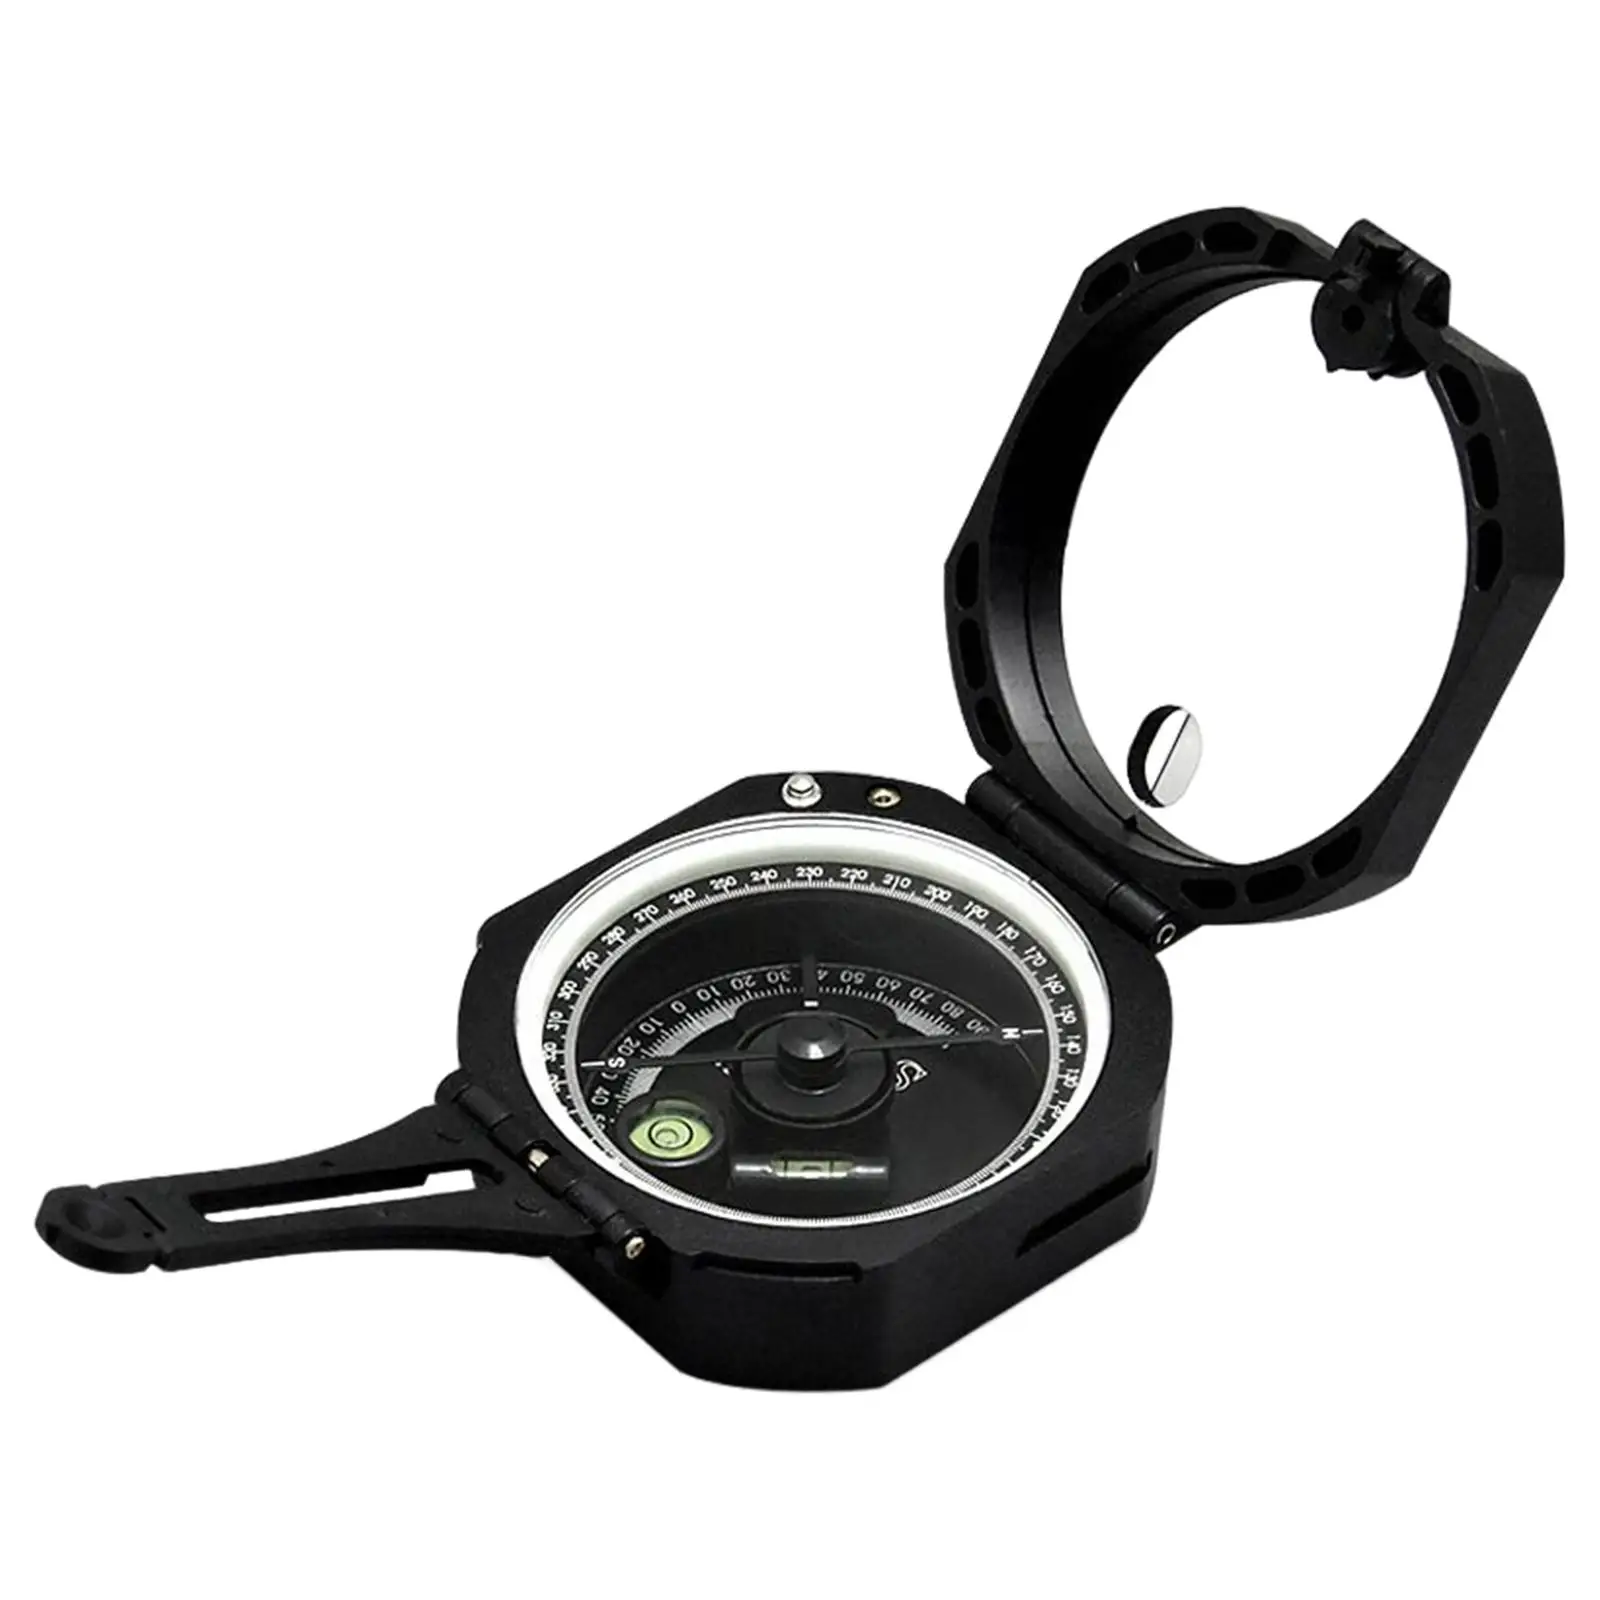 Geology Compass Accuracy   Transit Compass for Outdoor Activities